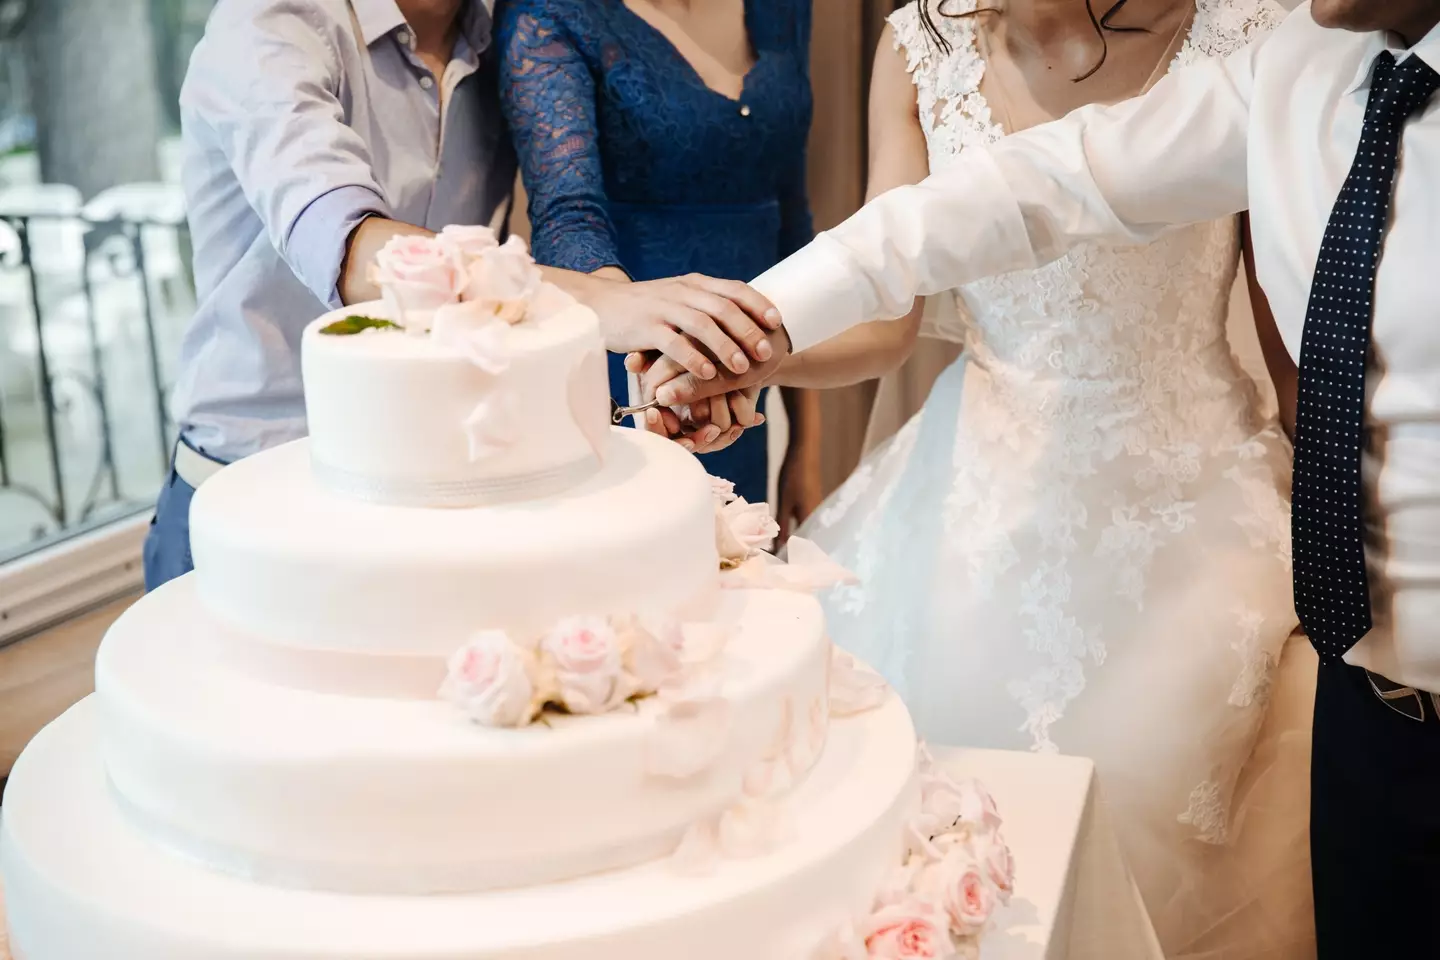 Many wedding traditions revolve around the cutting of the cake.